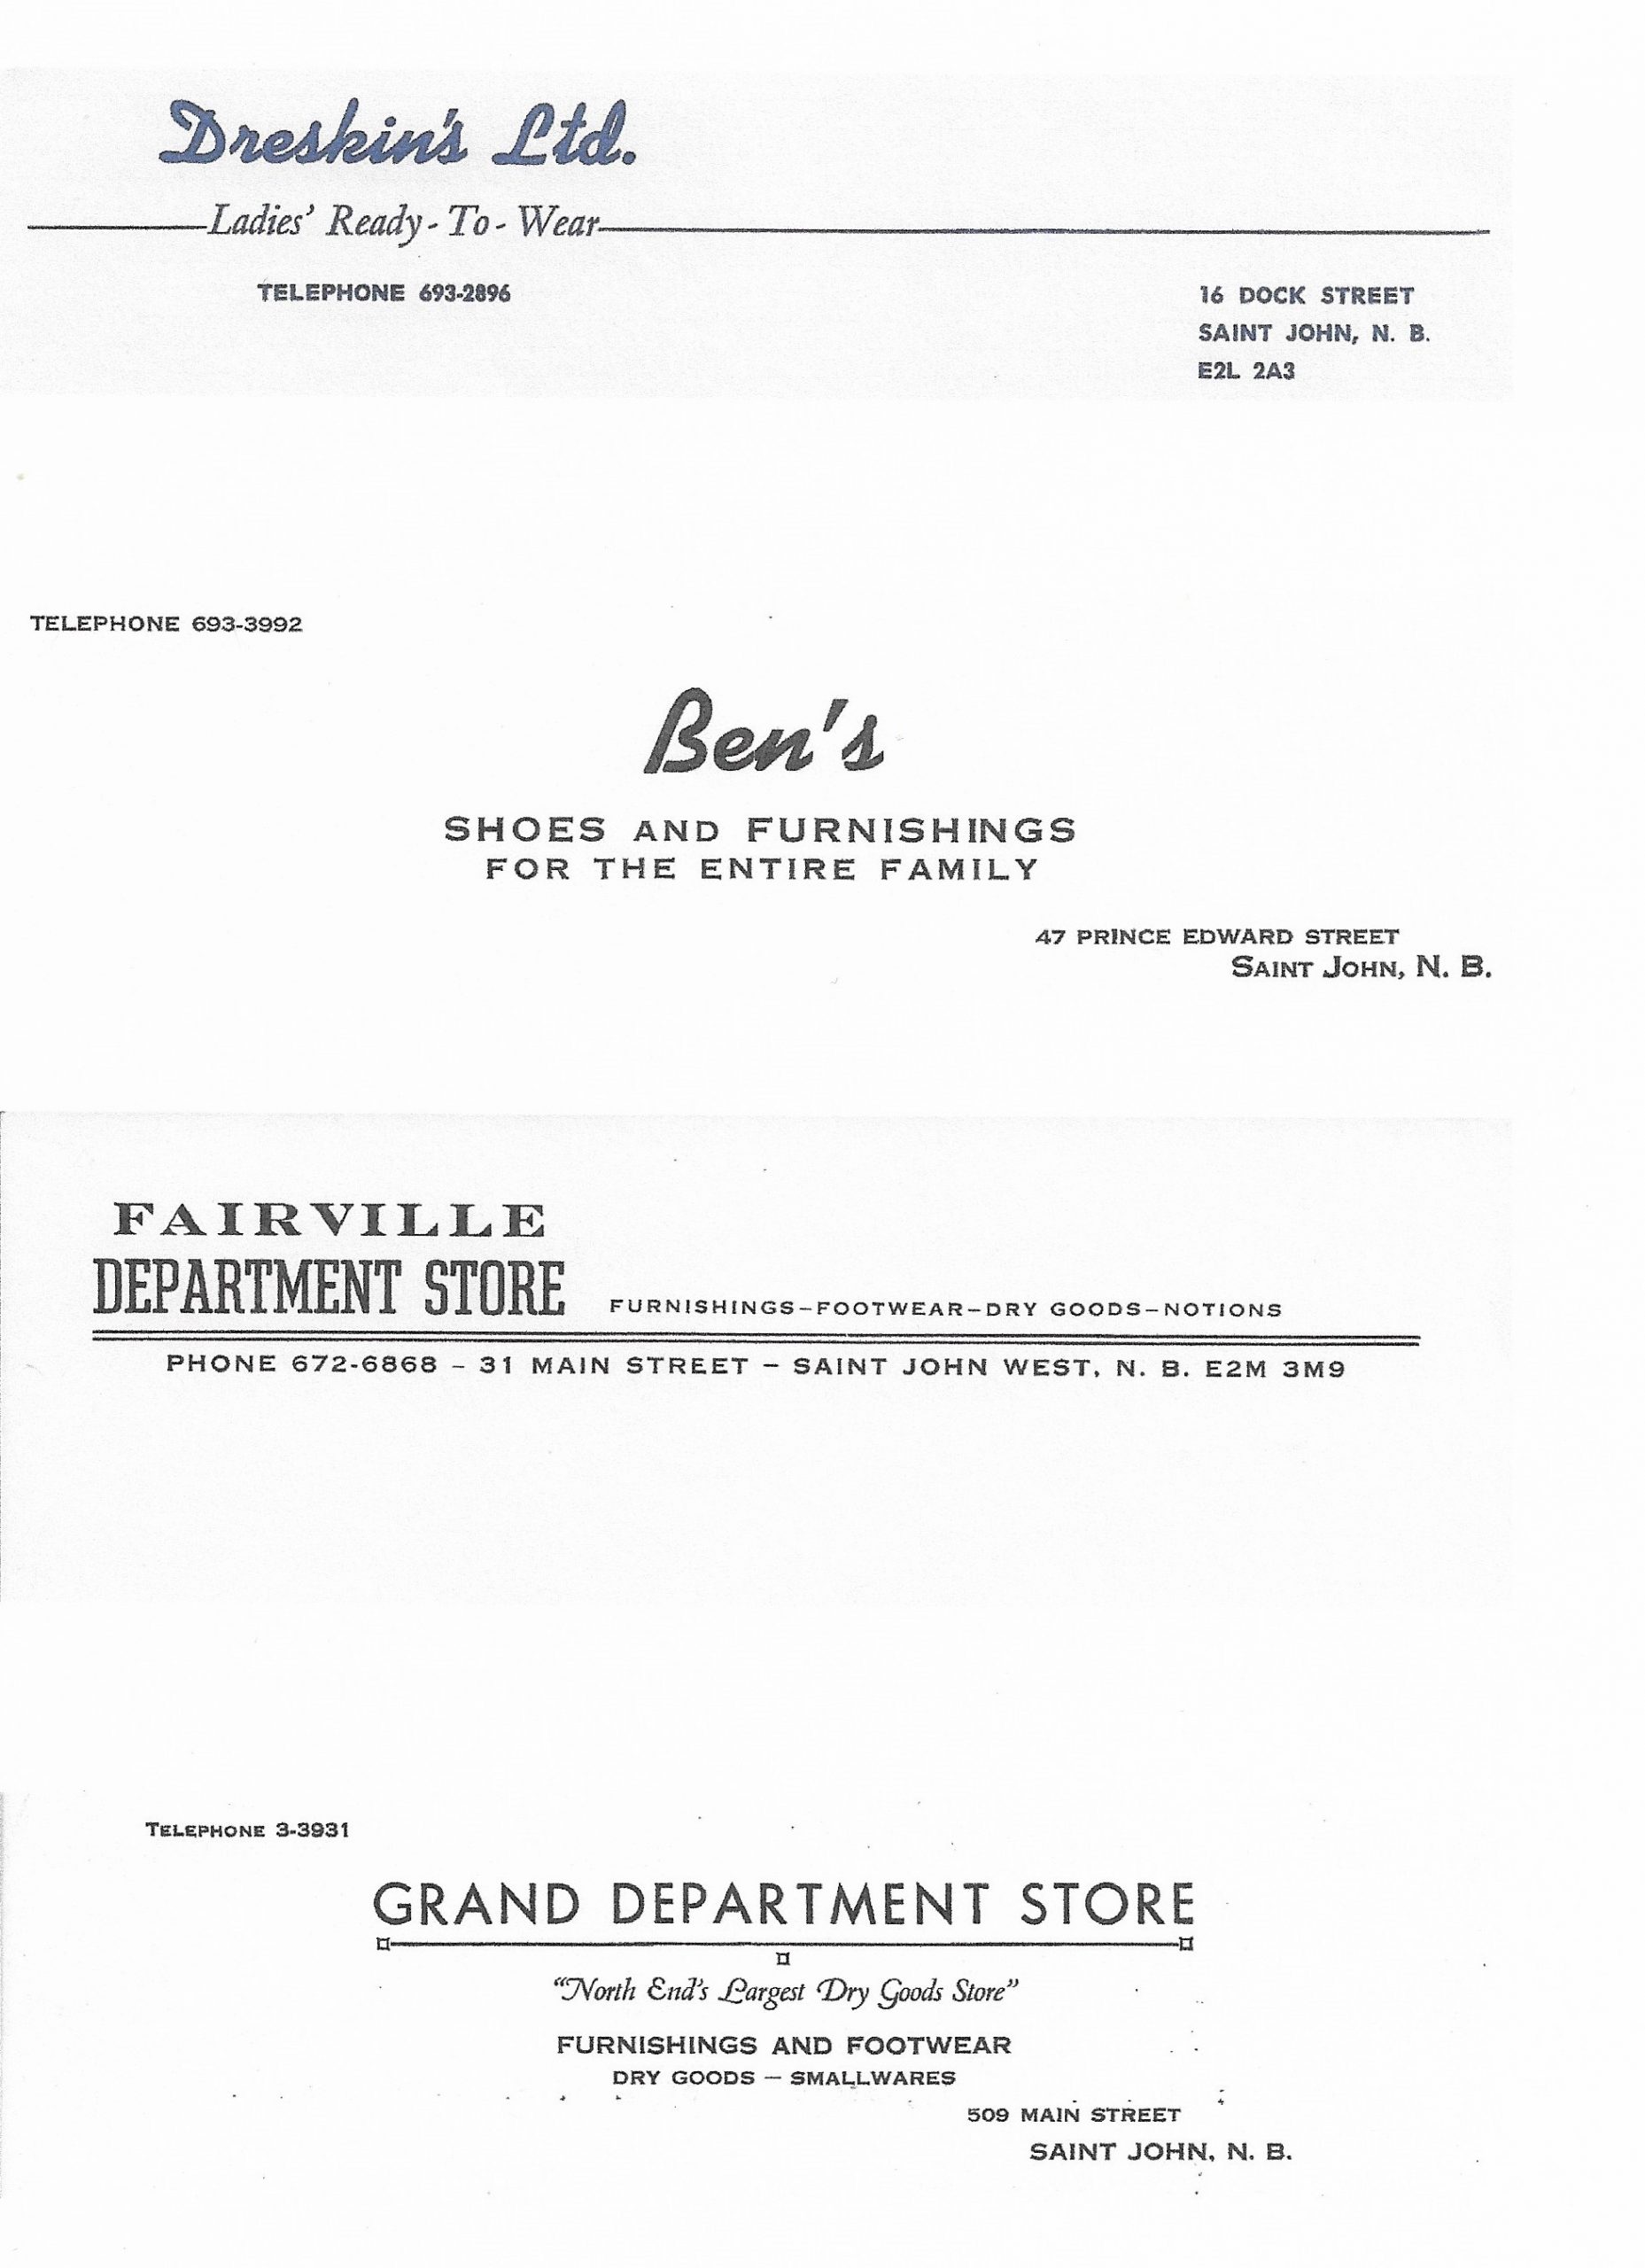 Four sheets of letterhead – for Dreskin’s Ltd., Ben’s Shoes and Furnishings, Fairville Department Store and Grand Department Store.